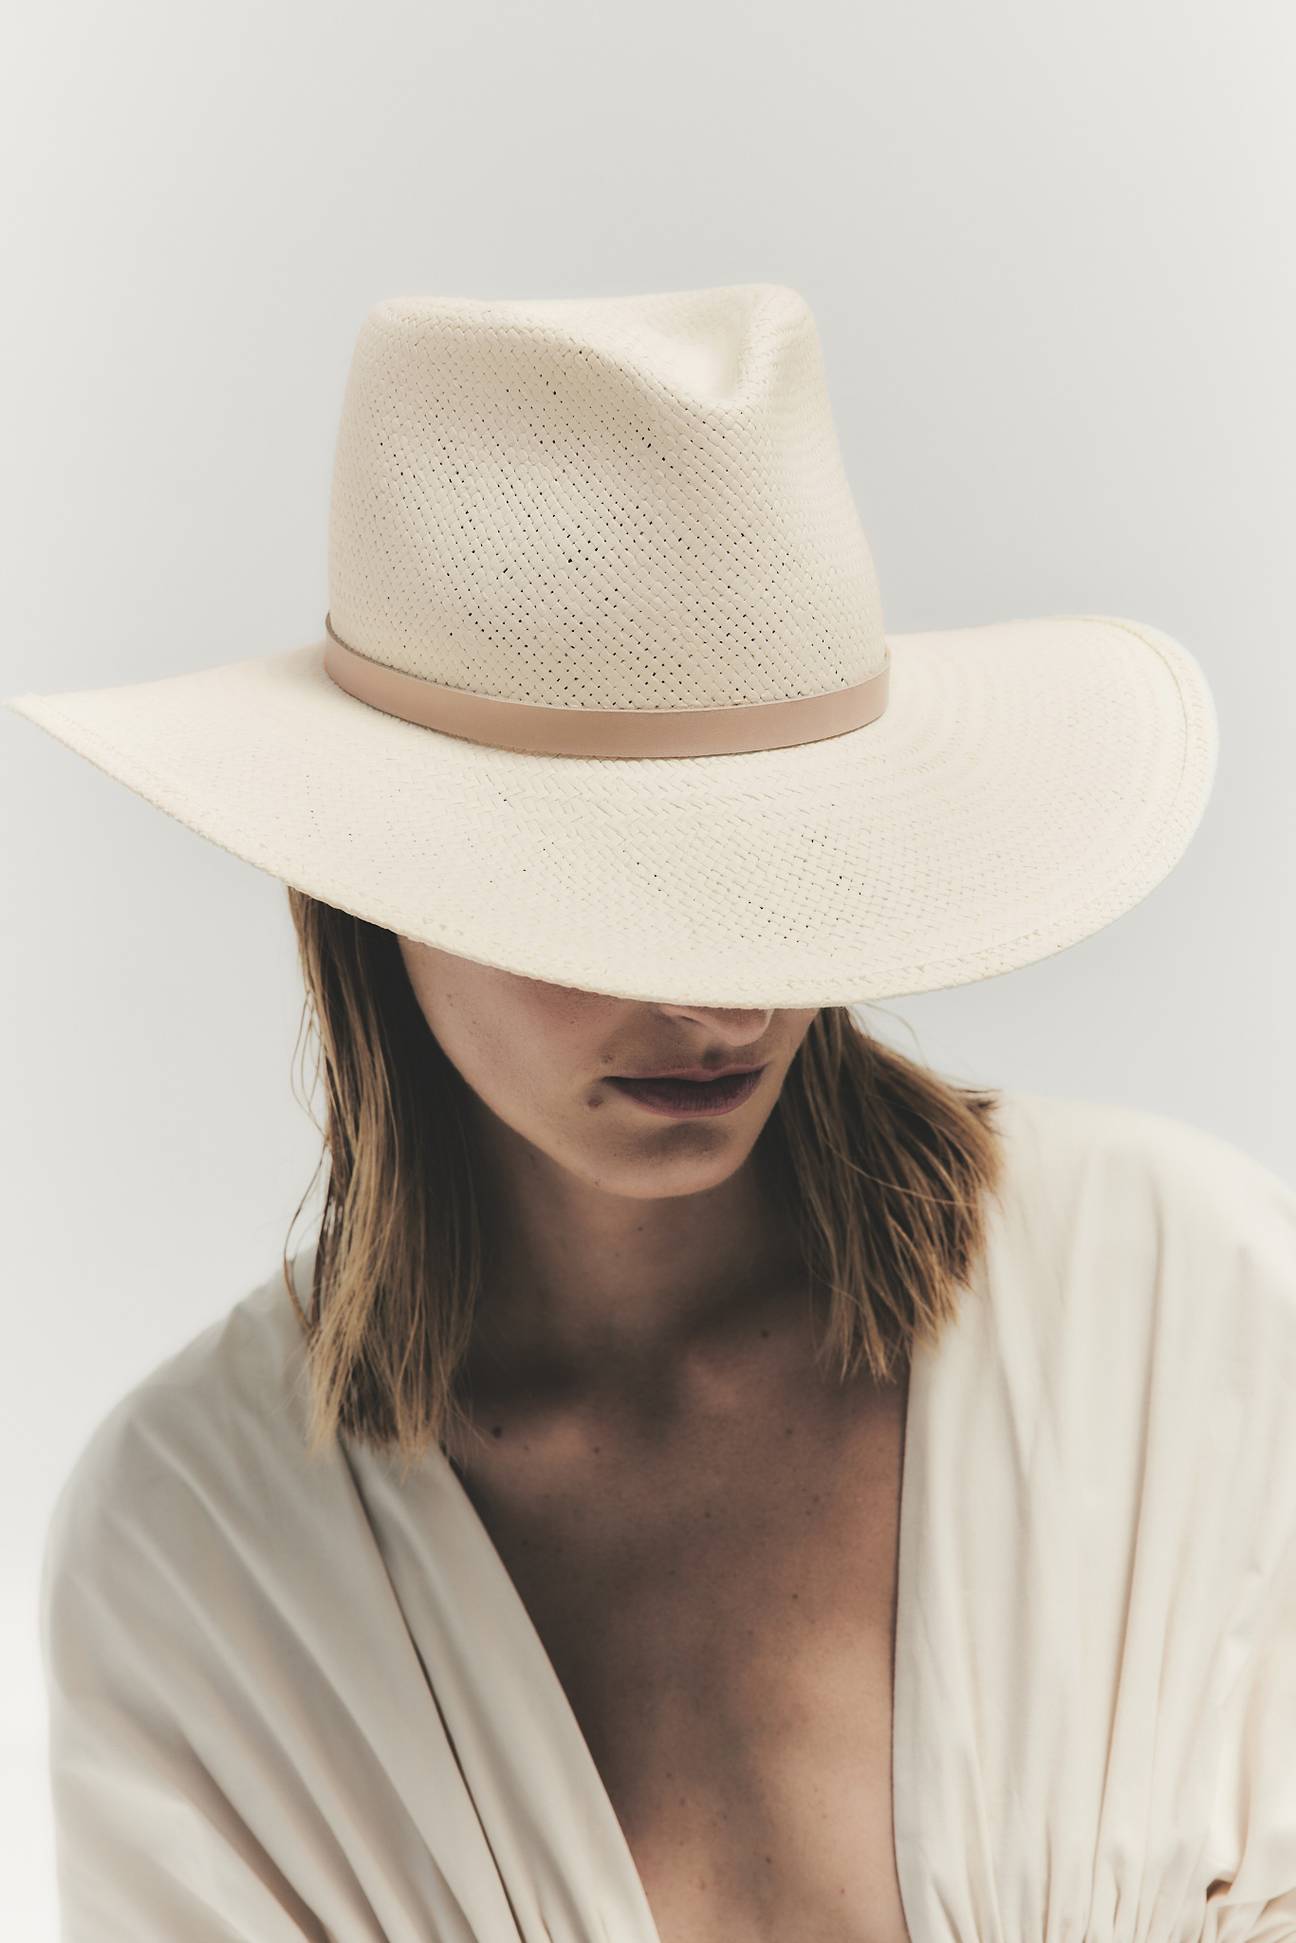 The Janessa Leone Sherman Hat in Natural available at The New Trend Australia